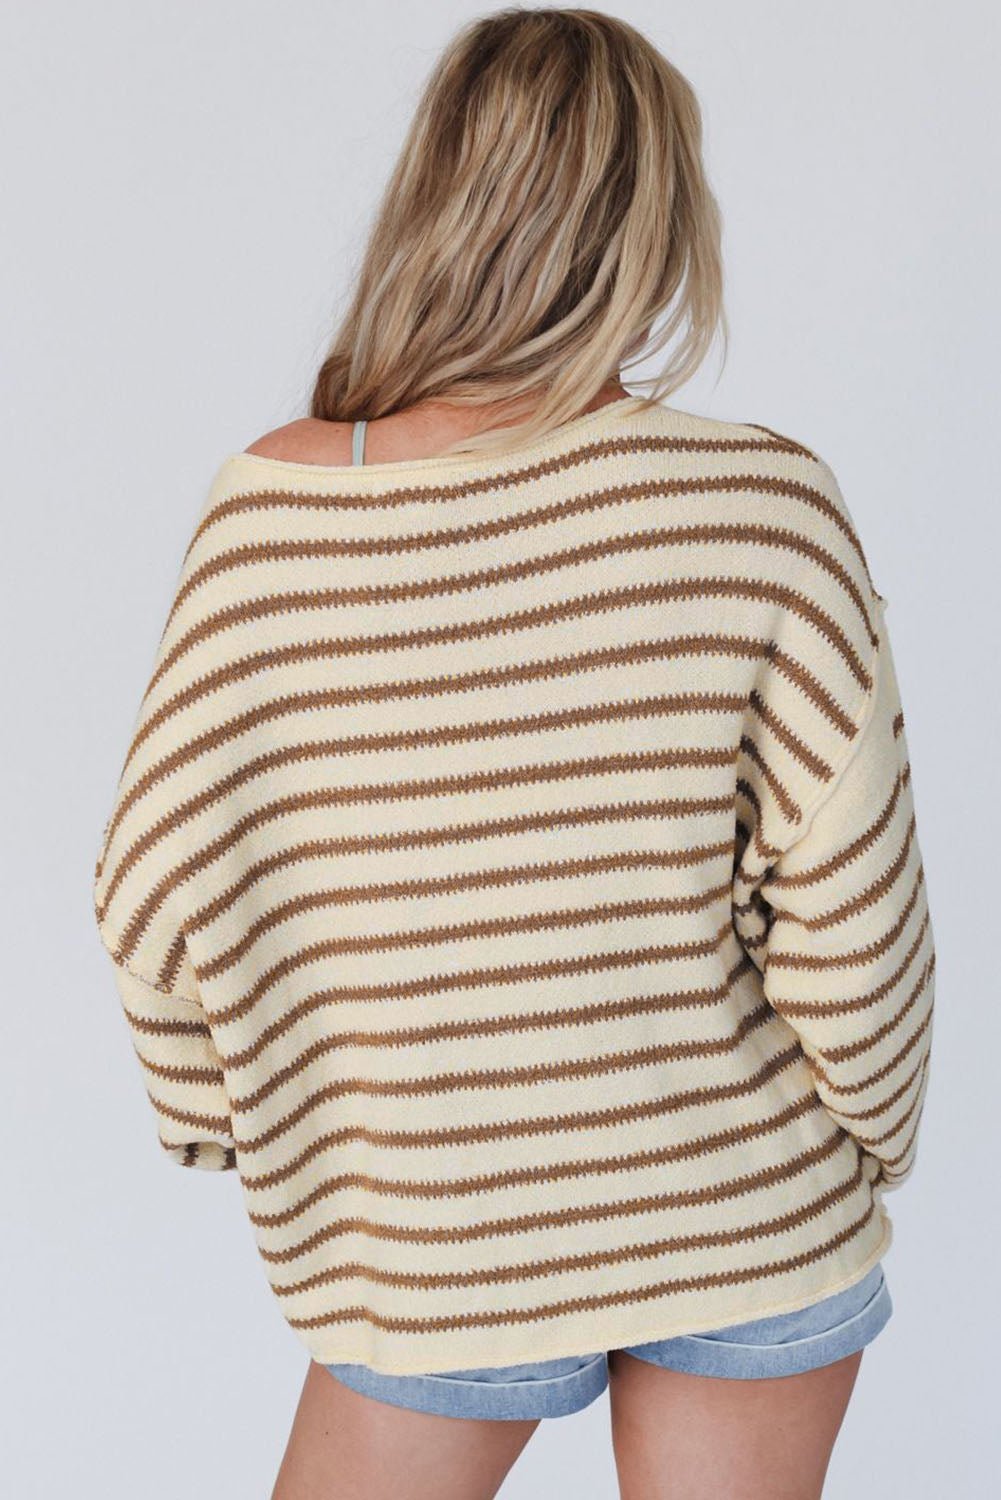 Boat Neck Long Sleeve Striped Sweater - Fashion Girl Online Store